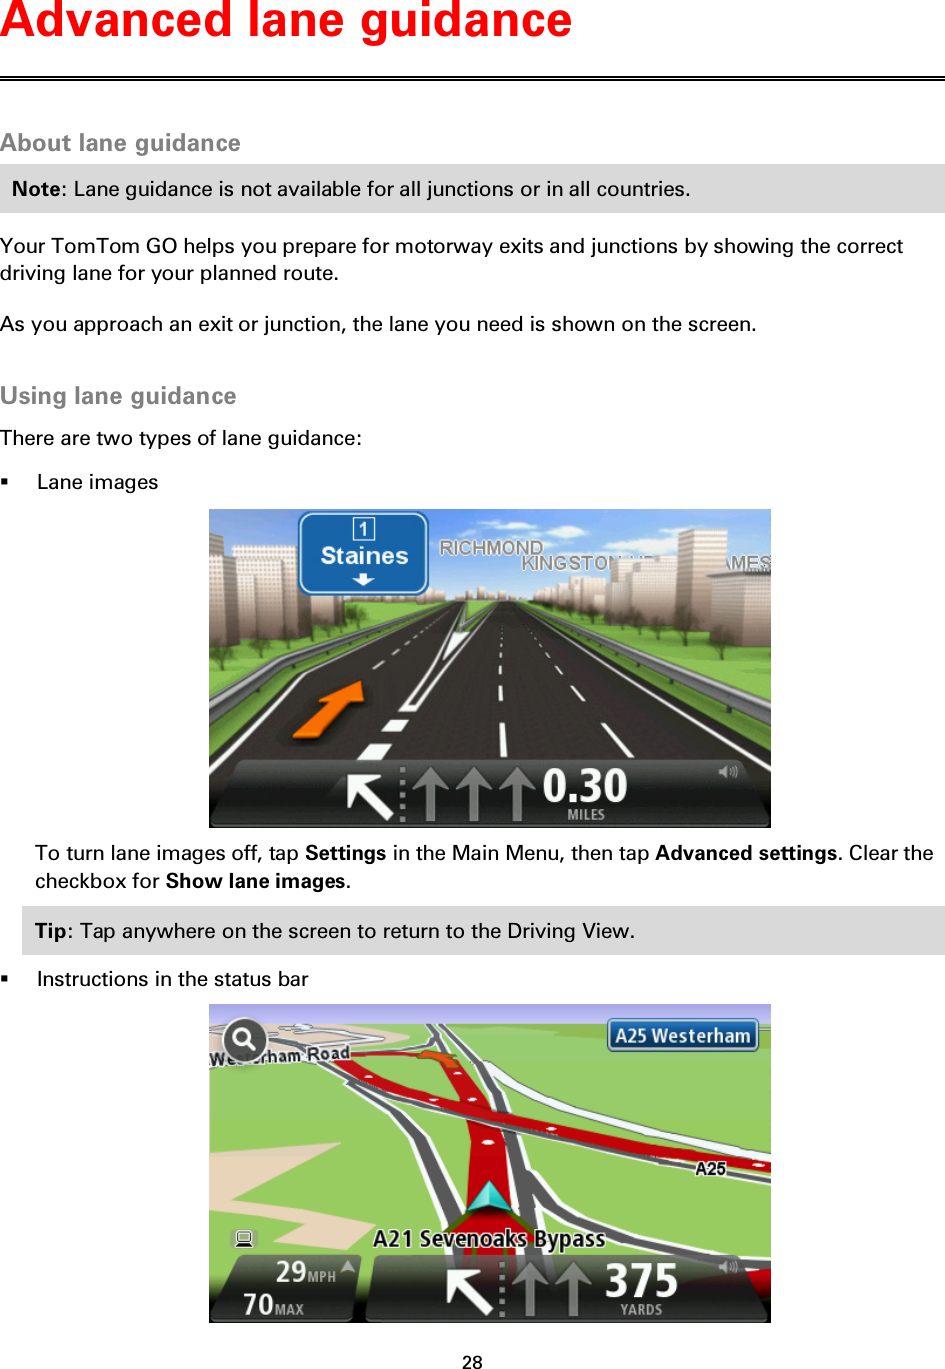 28    About lane guidance Note: Lane guidance is not available for all junctions or in all countries. Your TomTom GO helps you prepare for motorway exits and junctions by showing the correct driving lane for your planned route. As you approach an exit or junction, the lane you need is shown on the screen.  Using lane guidance There are two types of lane guidance:  Lane images  To turn lane images off, tap Settings in the Main Menu, then tap Advanced settings. Clear the checkbox for Show lane images. Tip: Tap anywhere on the screen to return to the Driving View.  Instructions in the status bar  Advanced lane guidance 